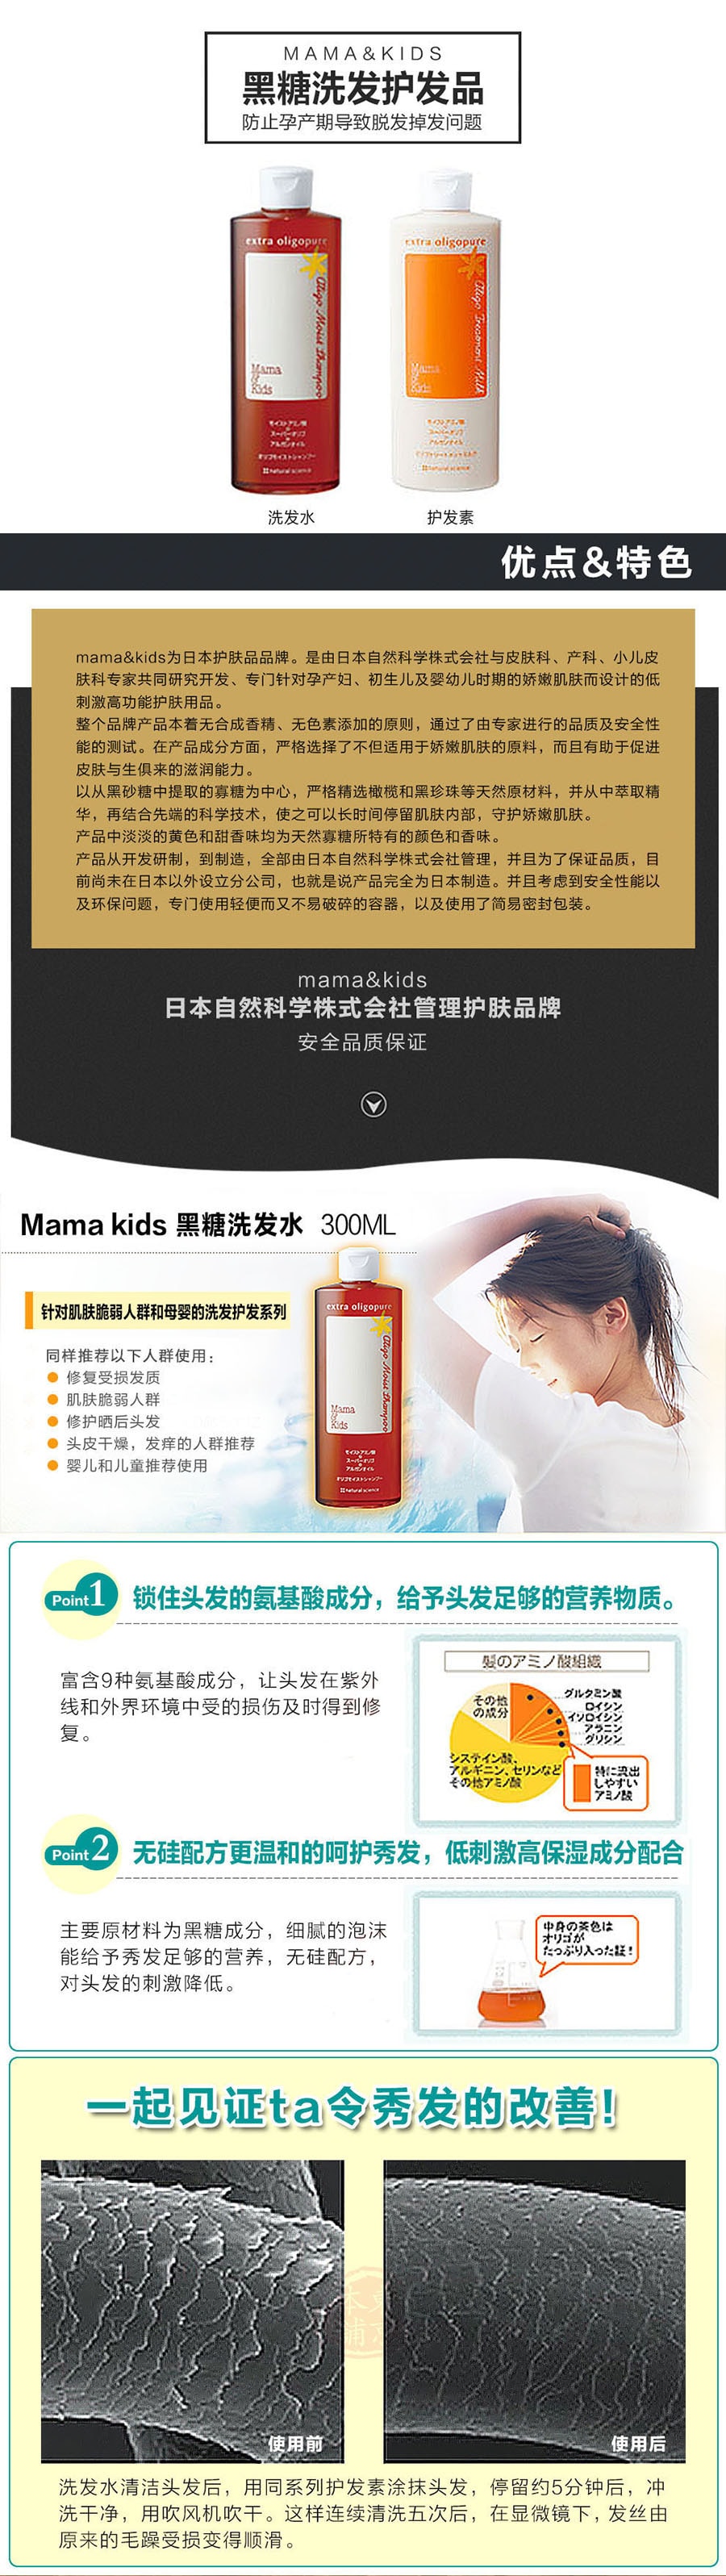 MAMA&KIDS(mamakids) hair shampoo (suit for pregnant or lactating women) 300ml+hair conditioner 300ml